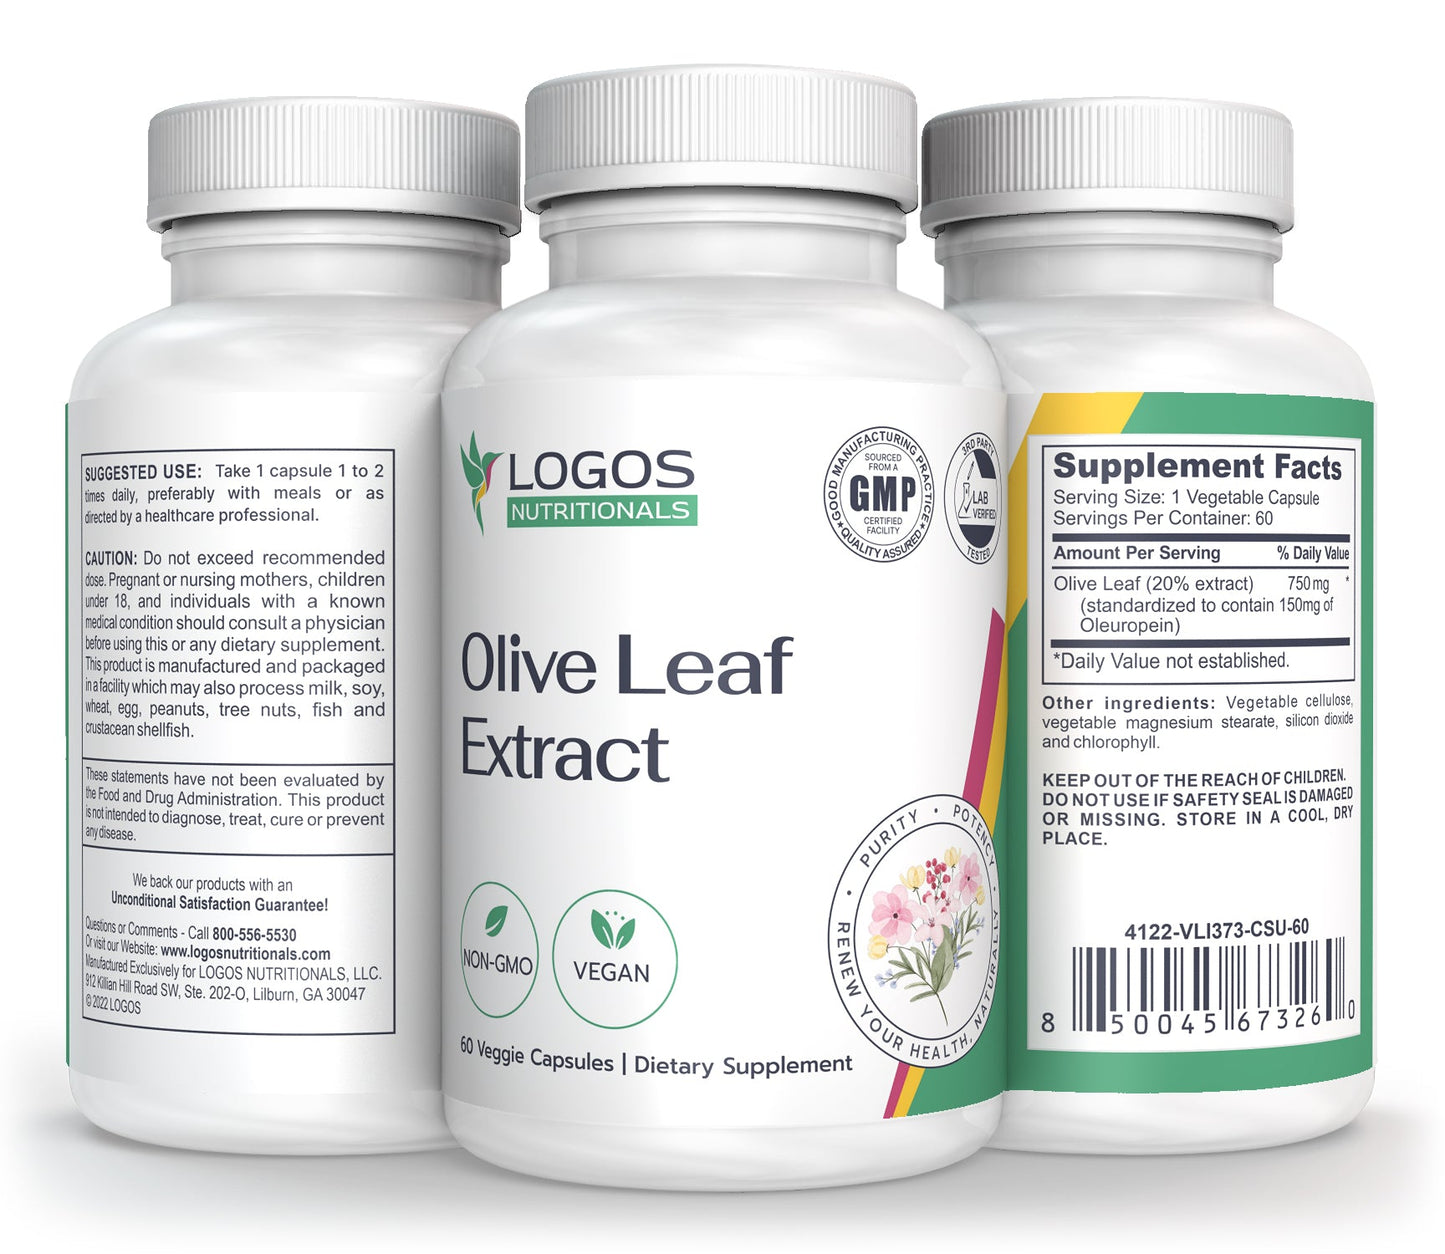 The Logos Lyme Disease Protocol & Extension - Olive Leaf Extract